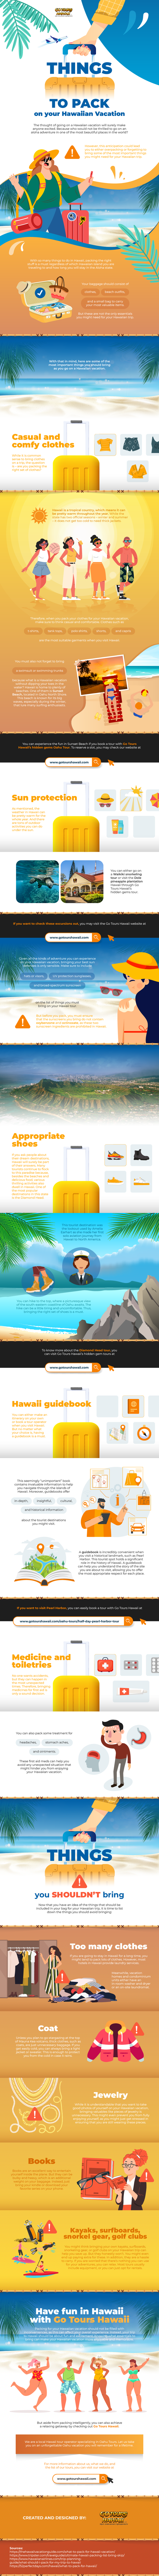 Things -to -Pack-on your-Hawaiian-Vacation-Infographic-Image-HFS